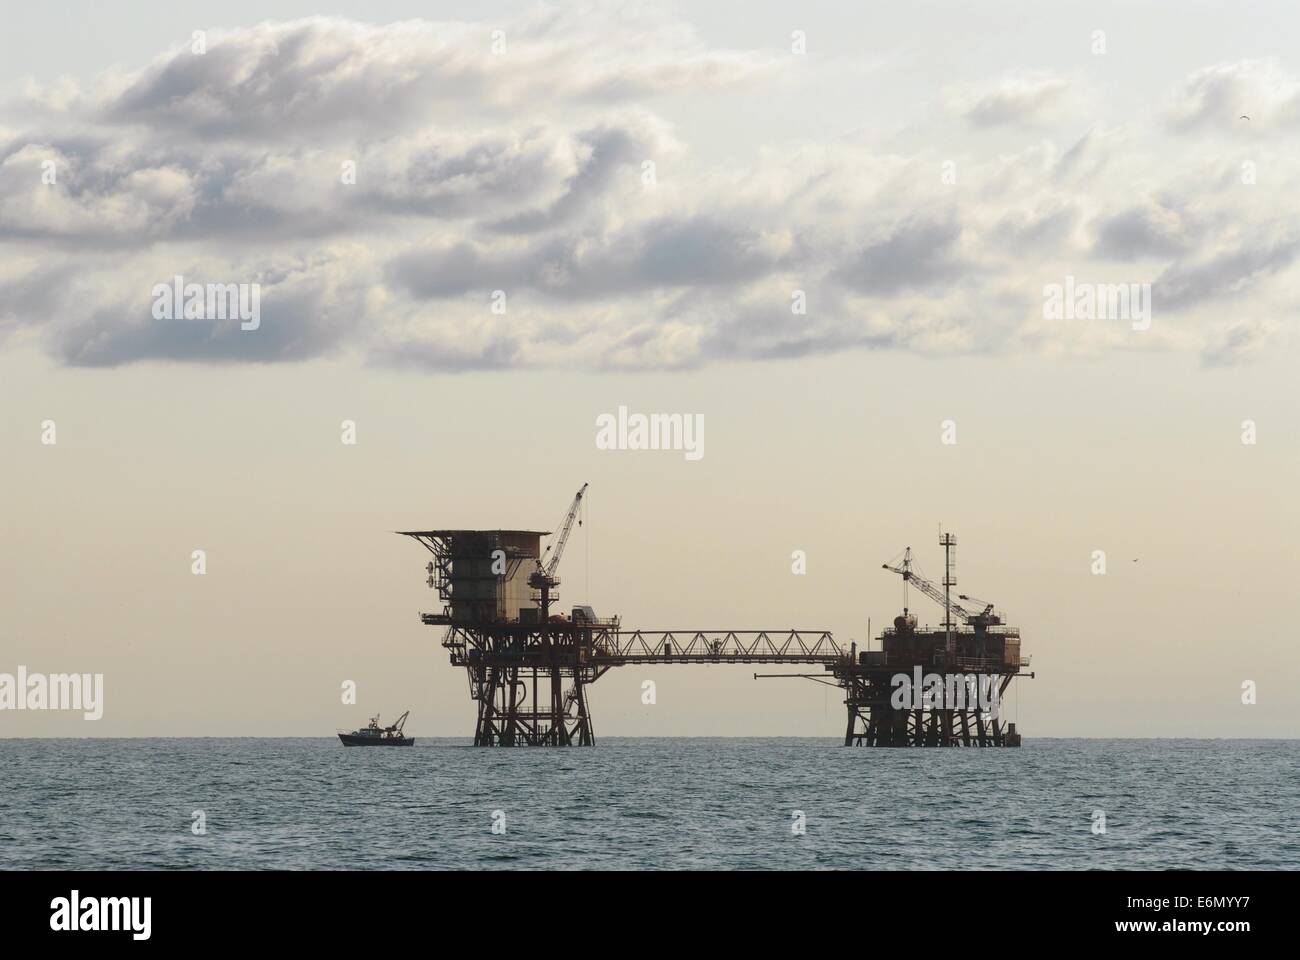 platforms for the extraction of oil and natural gas in Adriatic sea offshore Ravenna (Italy) Stock Photo